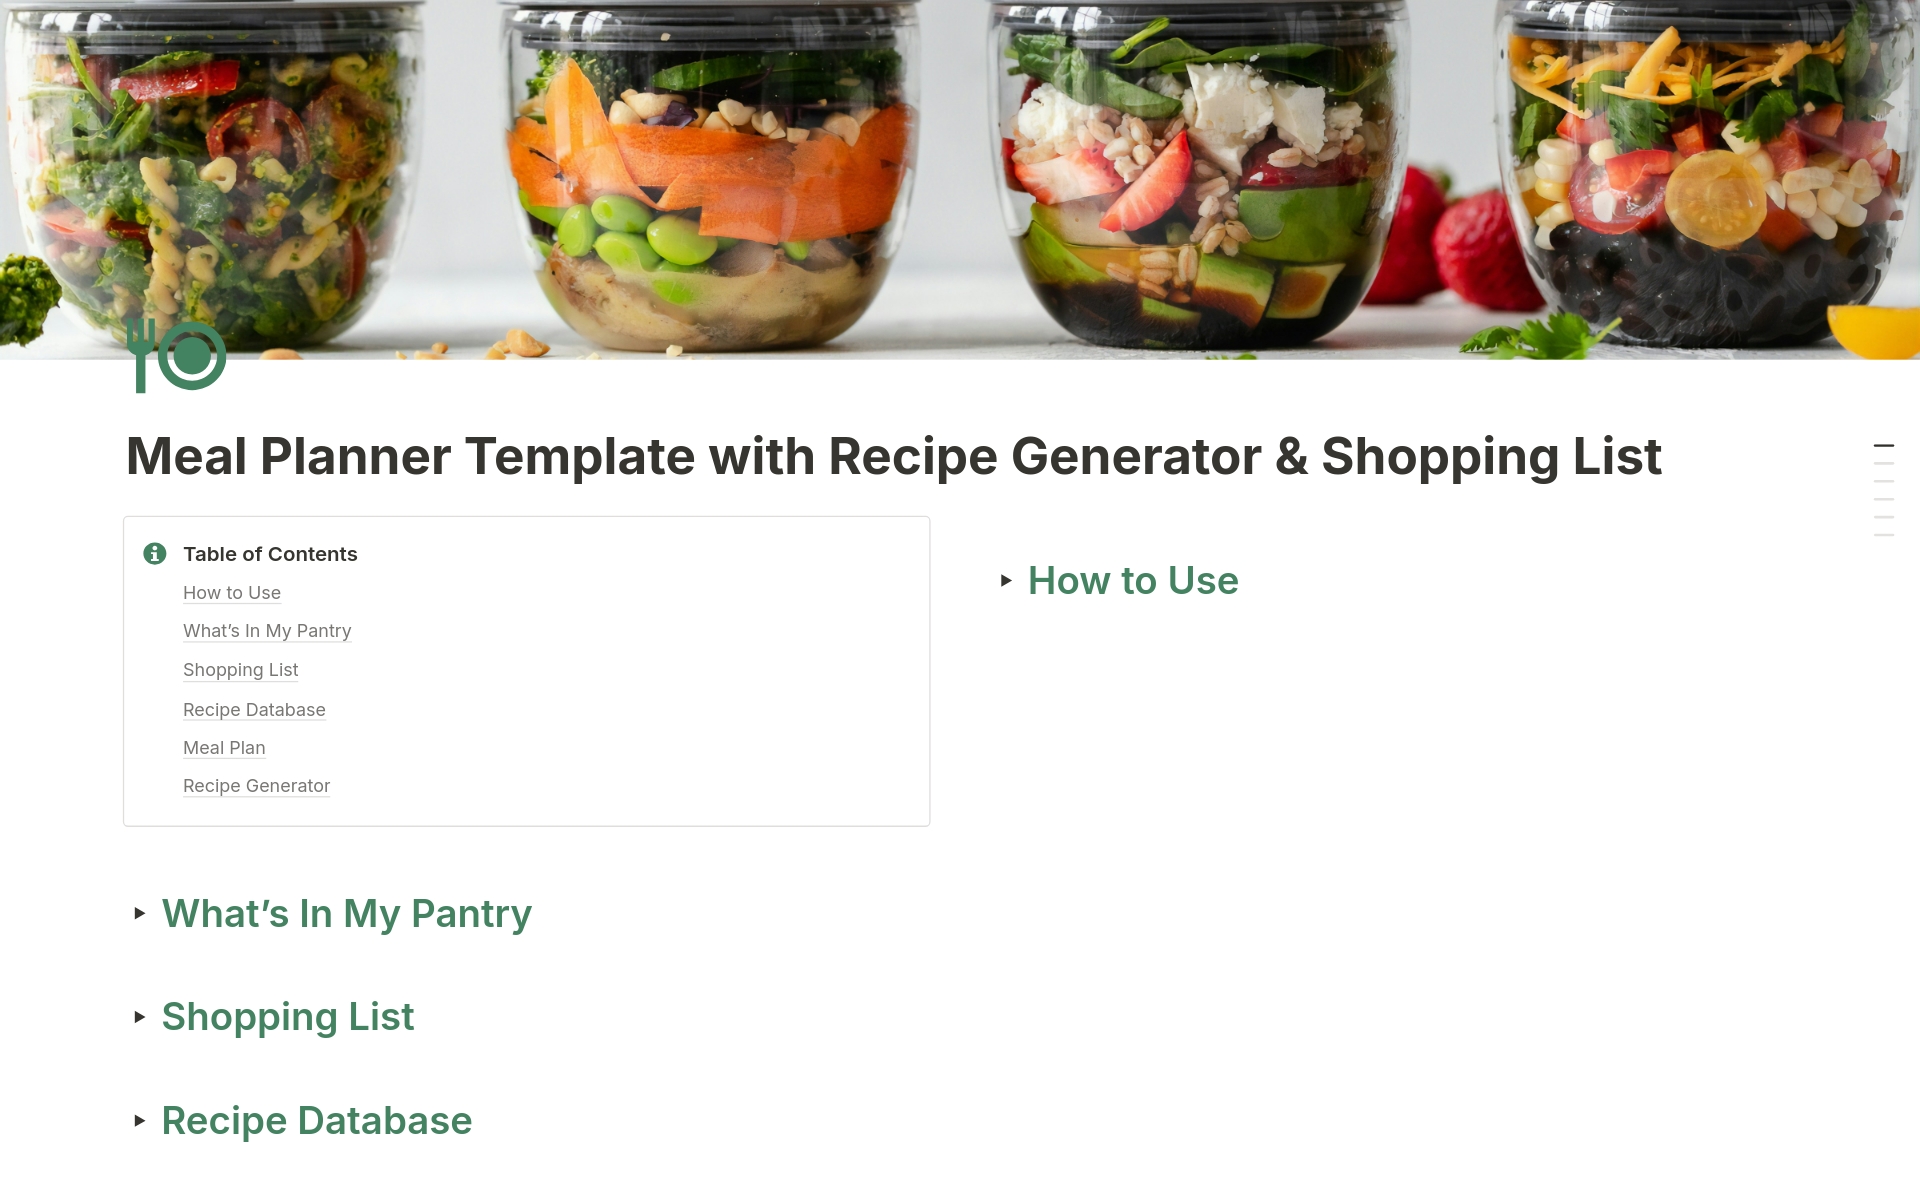 Reduce food waste, save money, and eat well with AI-powered planning! This Meal Planner Template includes a calendar-based meal planner; shopping list; kitchen inventory; and AI-prompt builder to create recipes with ingredients you already have on hand.